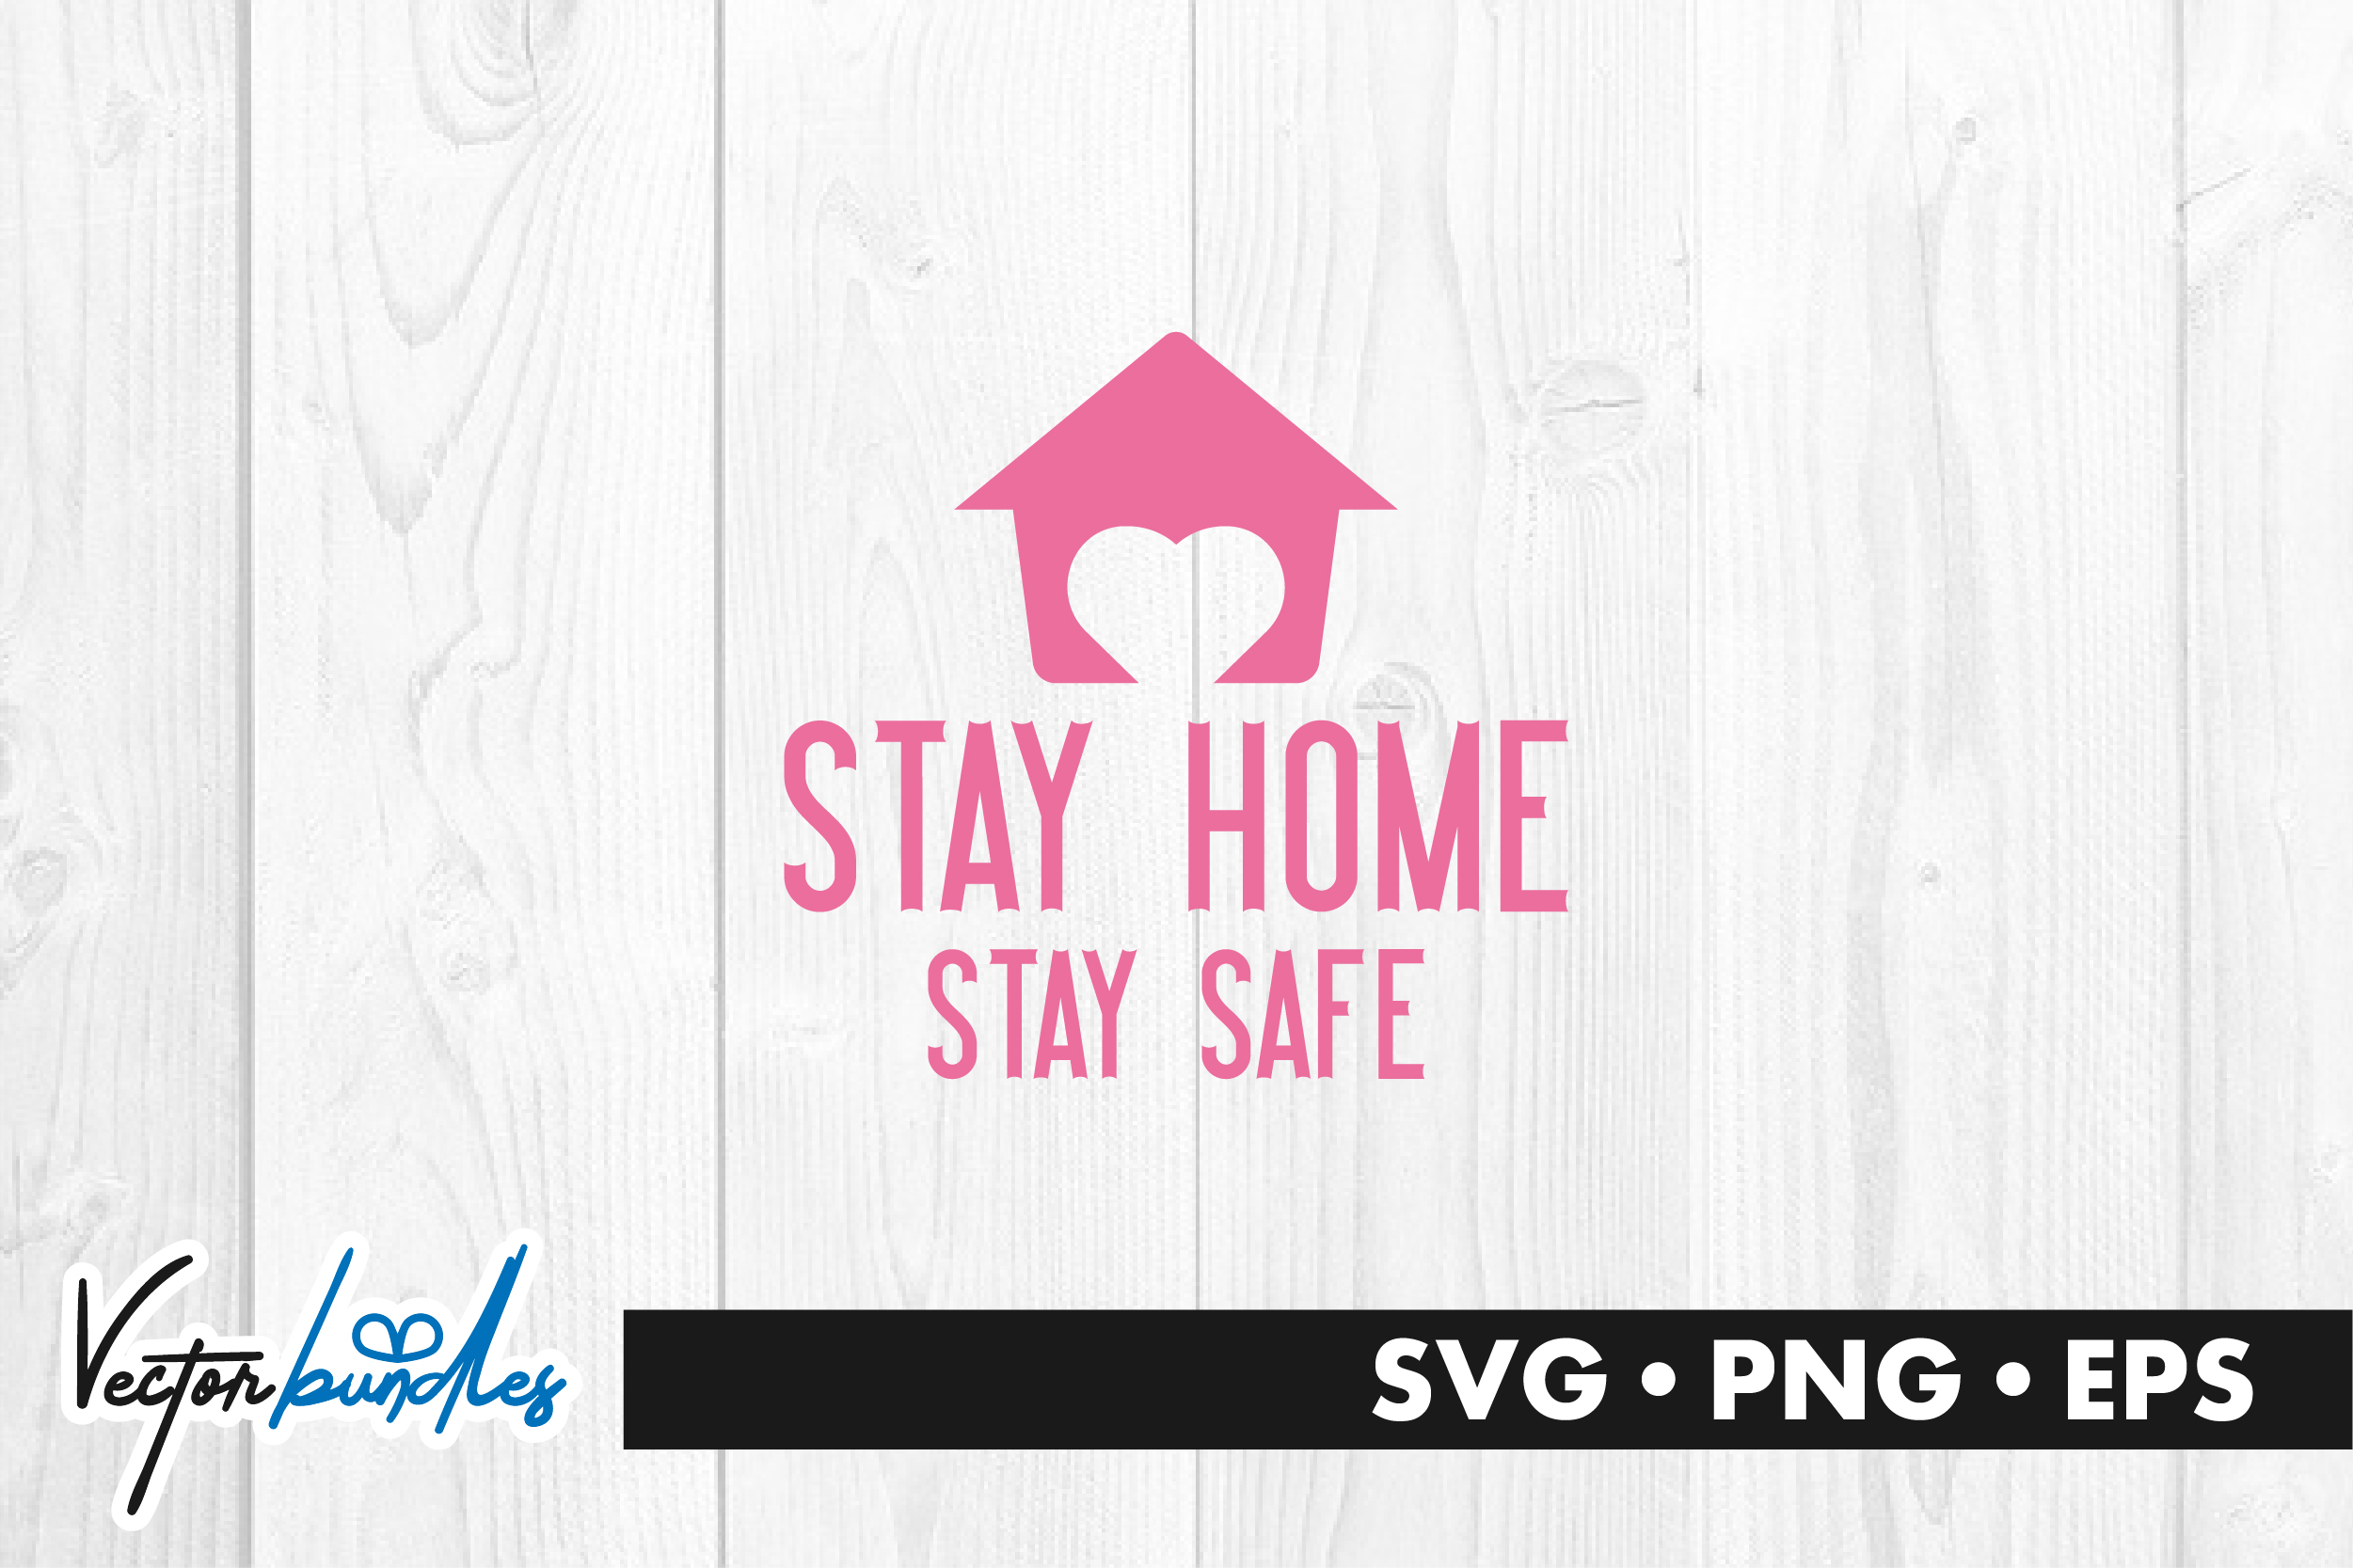 Download Stay home stay safe quote svg